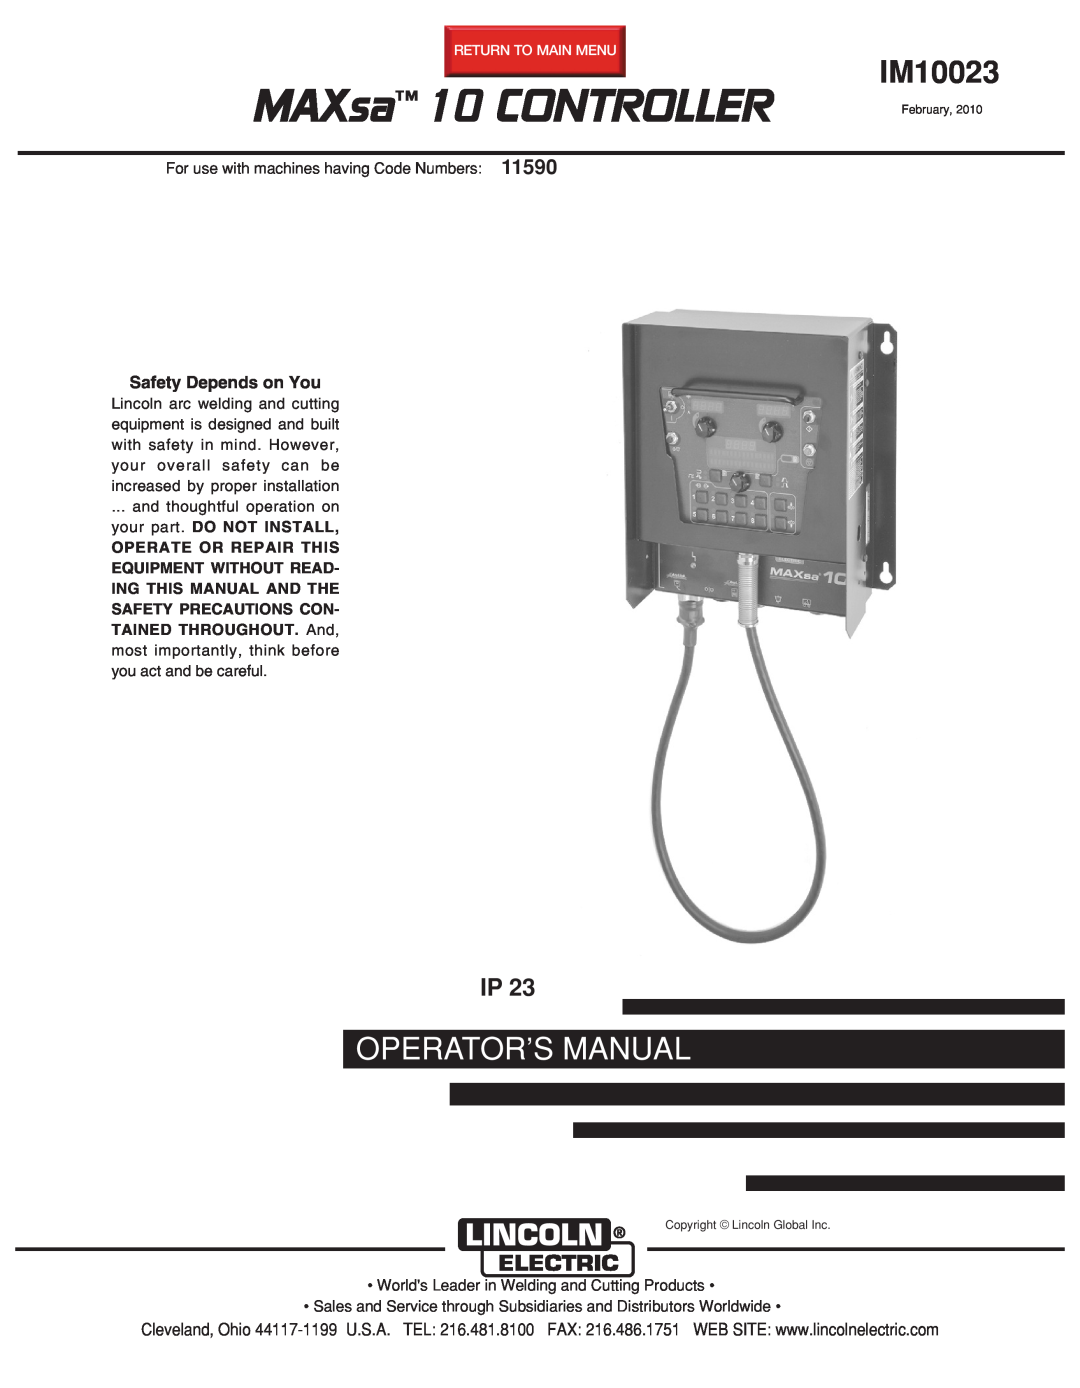 Lincoln Electric IM10023 manual MAXsa, Controller, Operator’S Manual, Safety Depends on You 